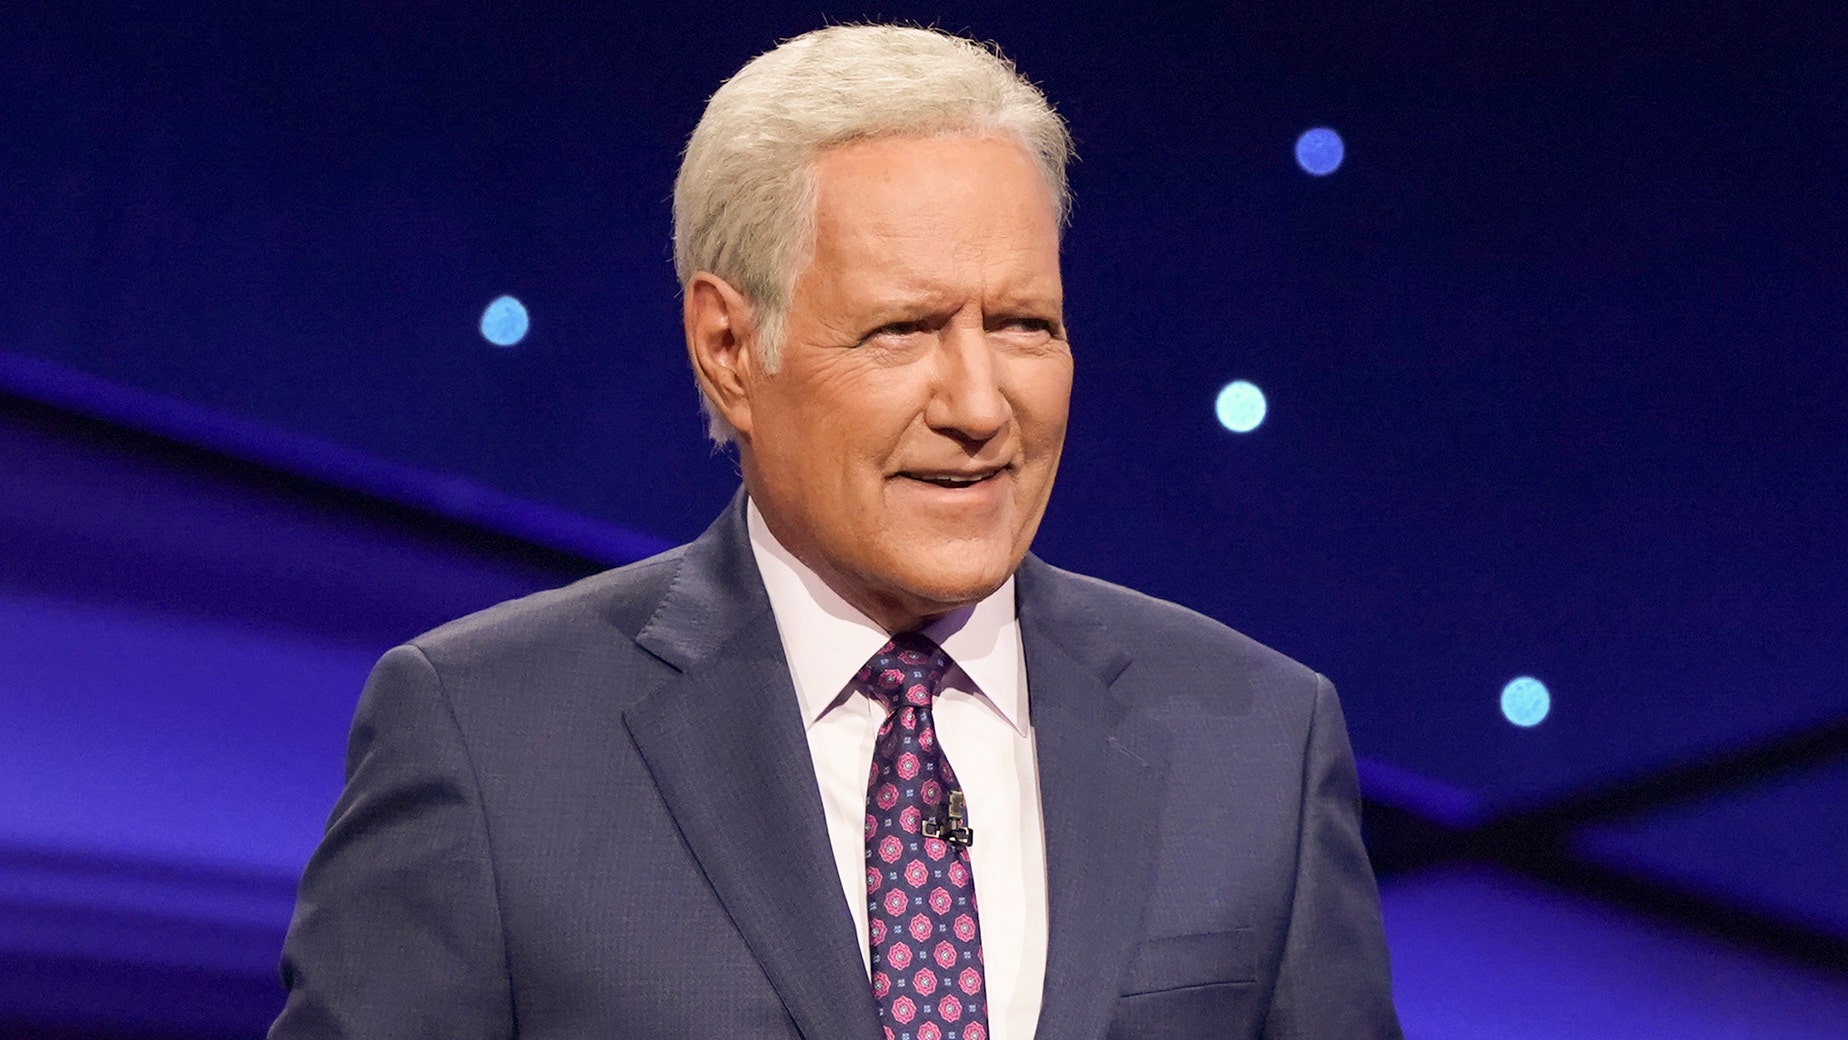 Alex Trebek's daughter praises late 'Jeopardy' host after his last episode: ‘You were extraordinary’